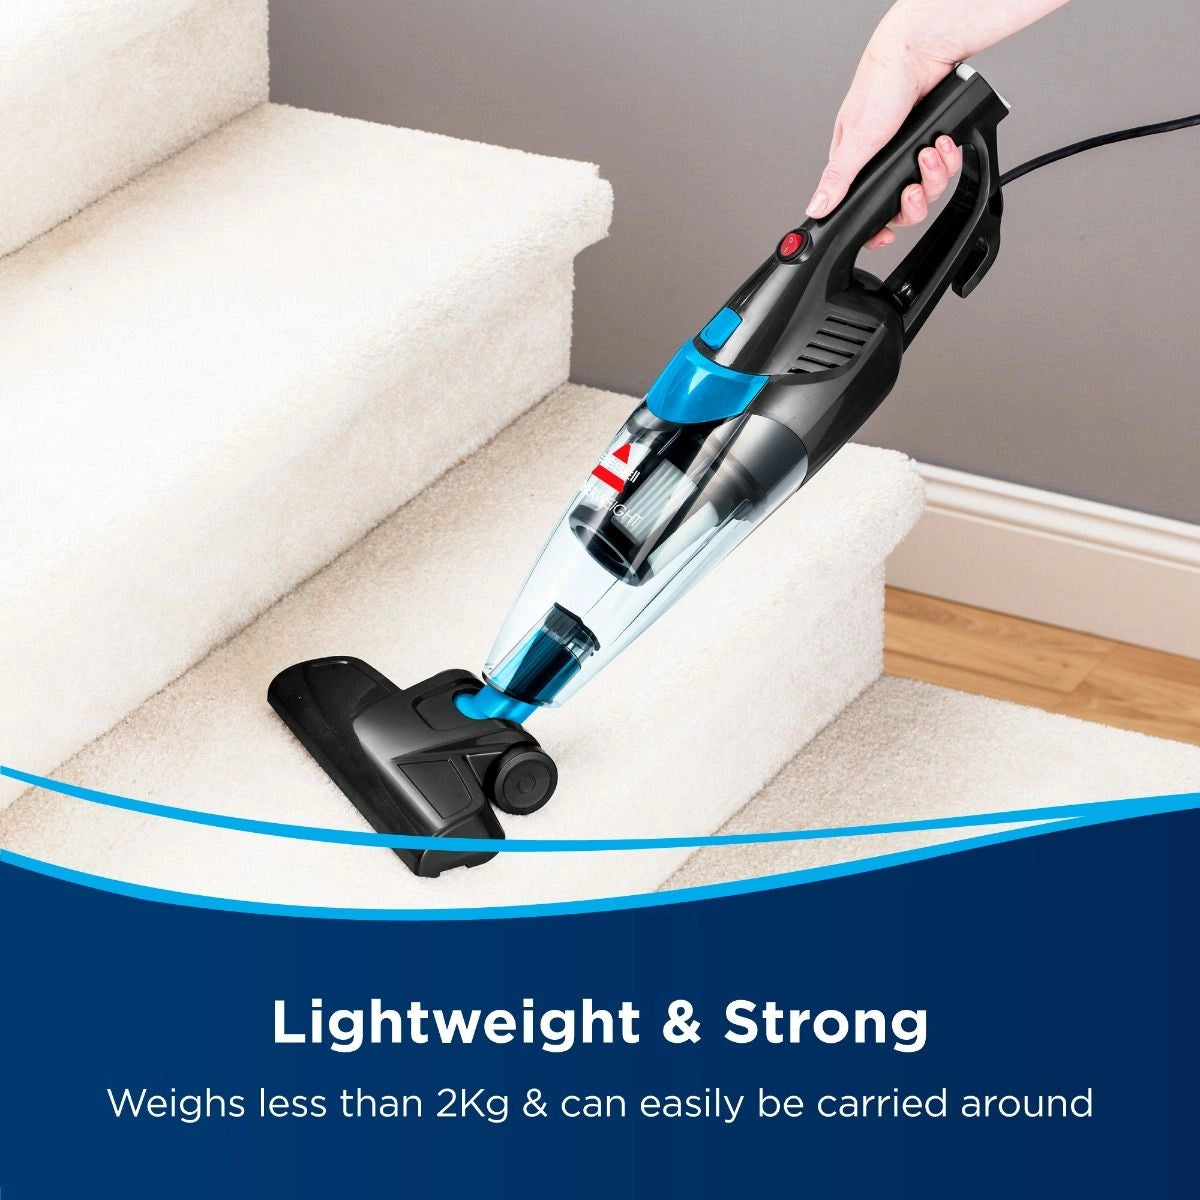 BISSELL Featherweight 2-in-1 520W